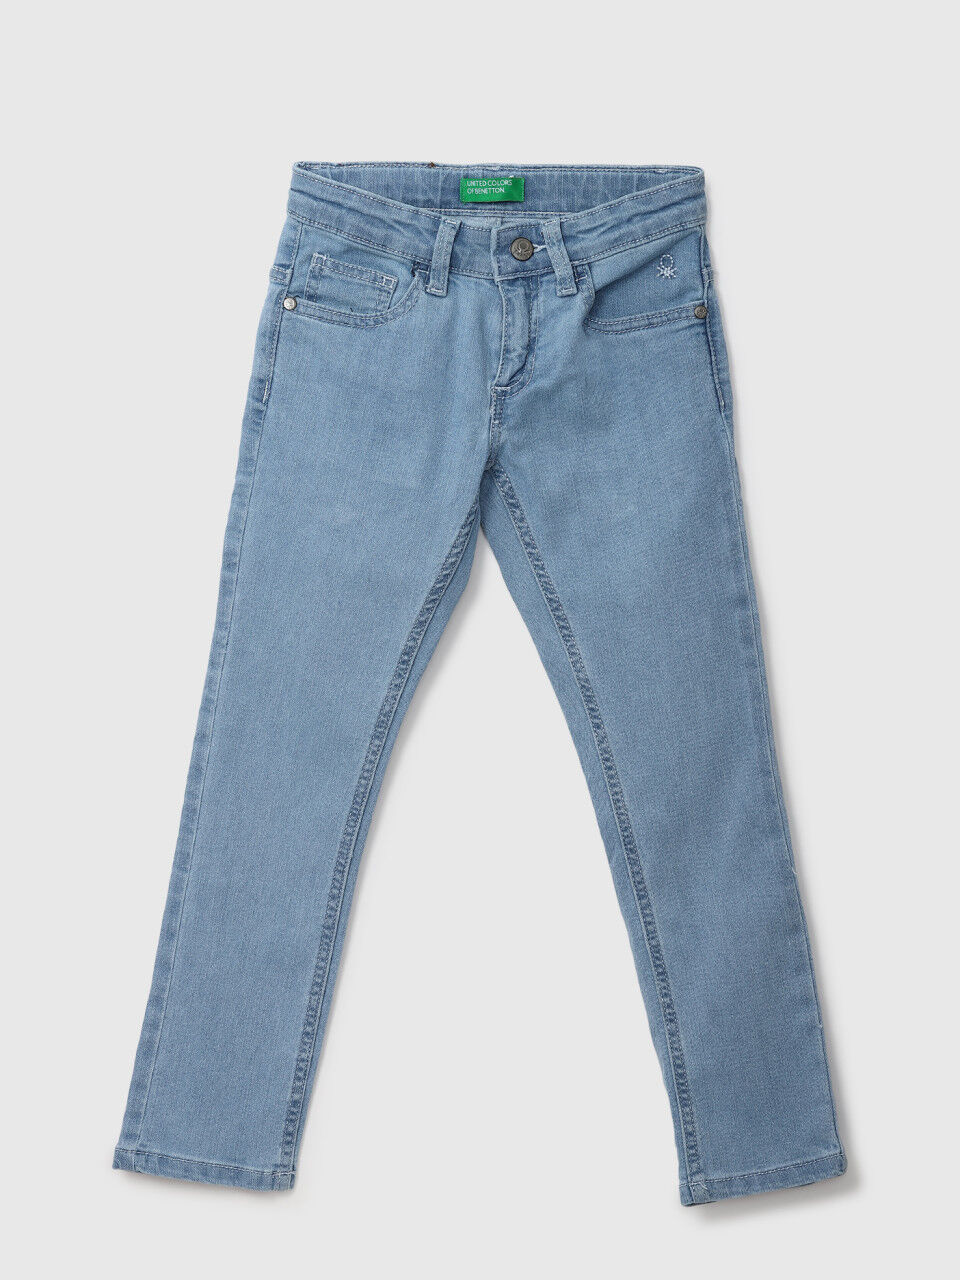 United Colors Of Benetton Basic Blue Jeans